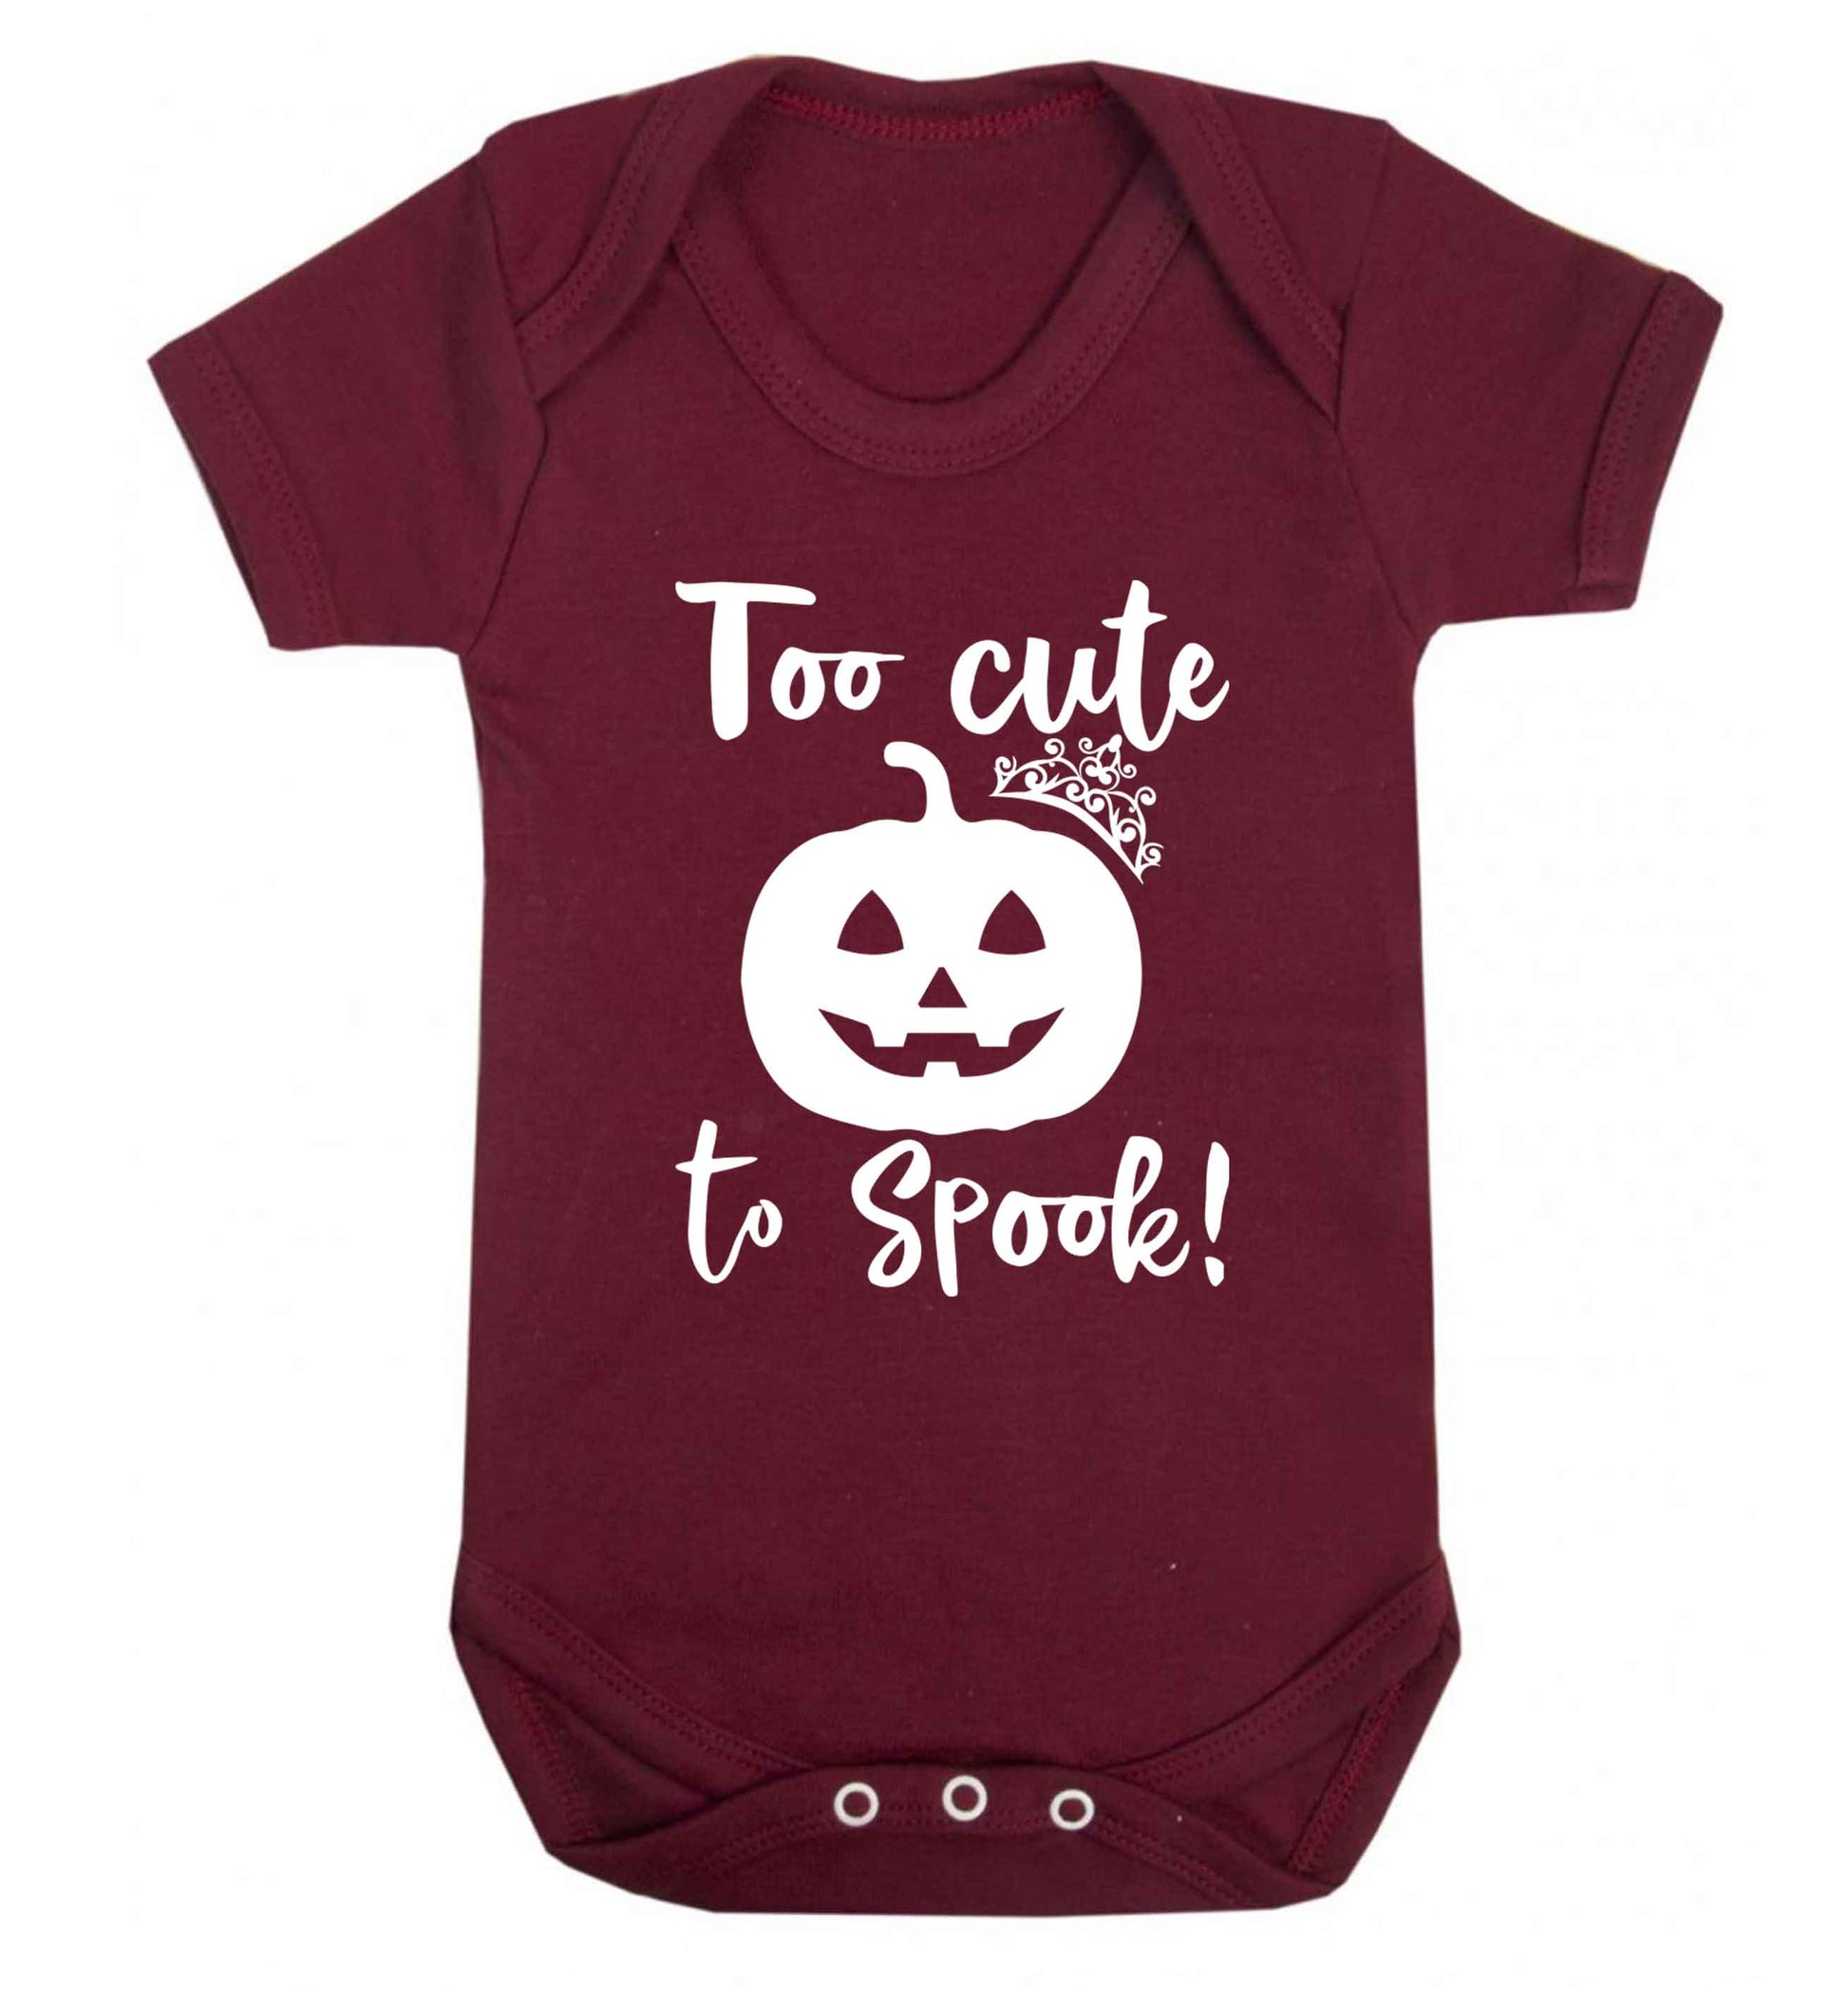 Too cute to spook! Baby Vest maroon 18-24 months